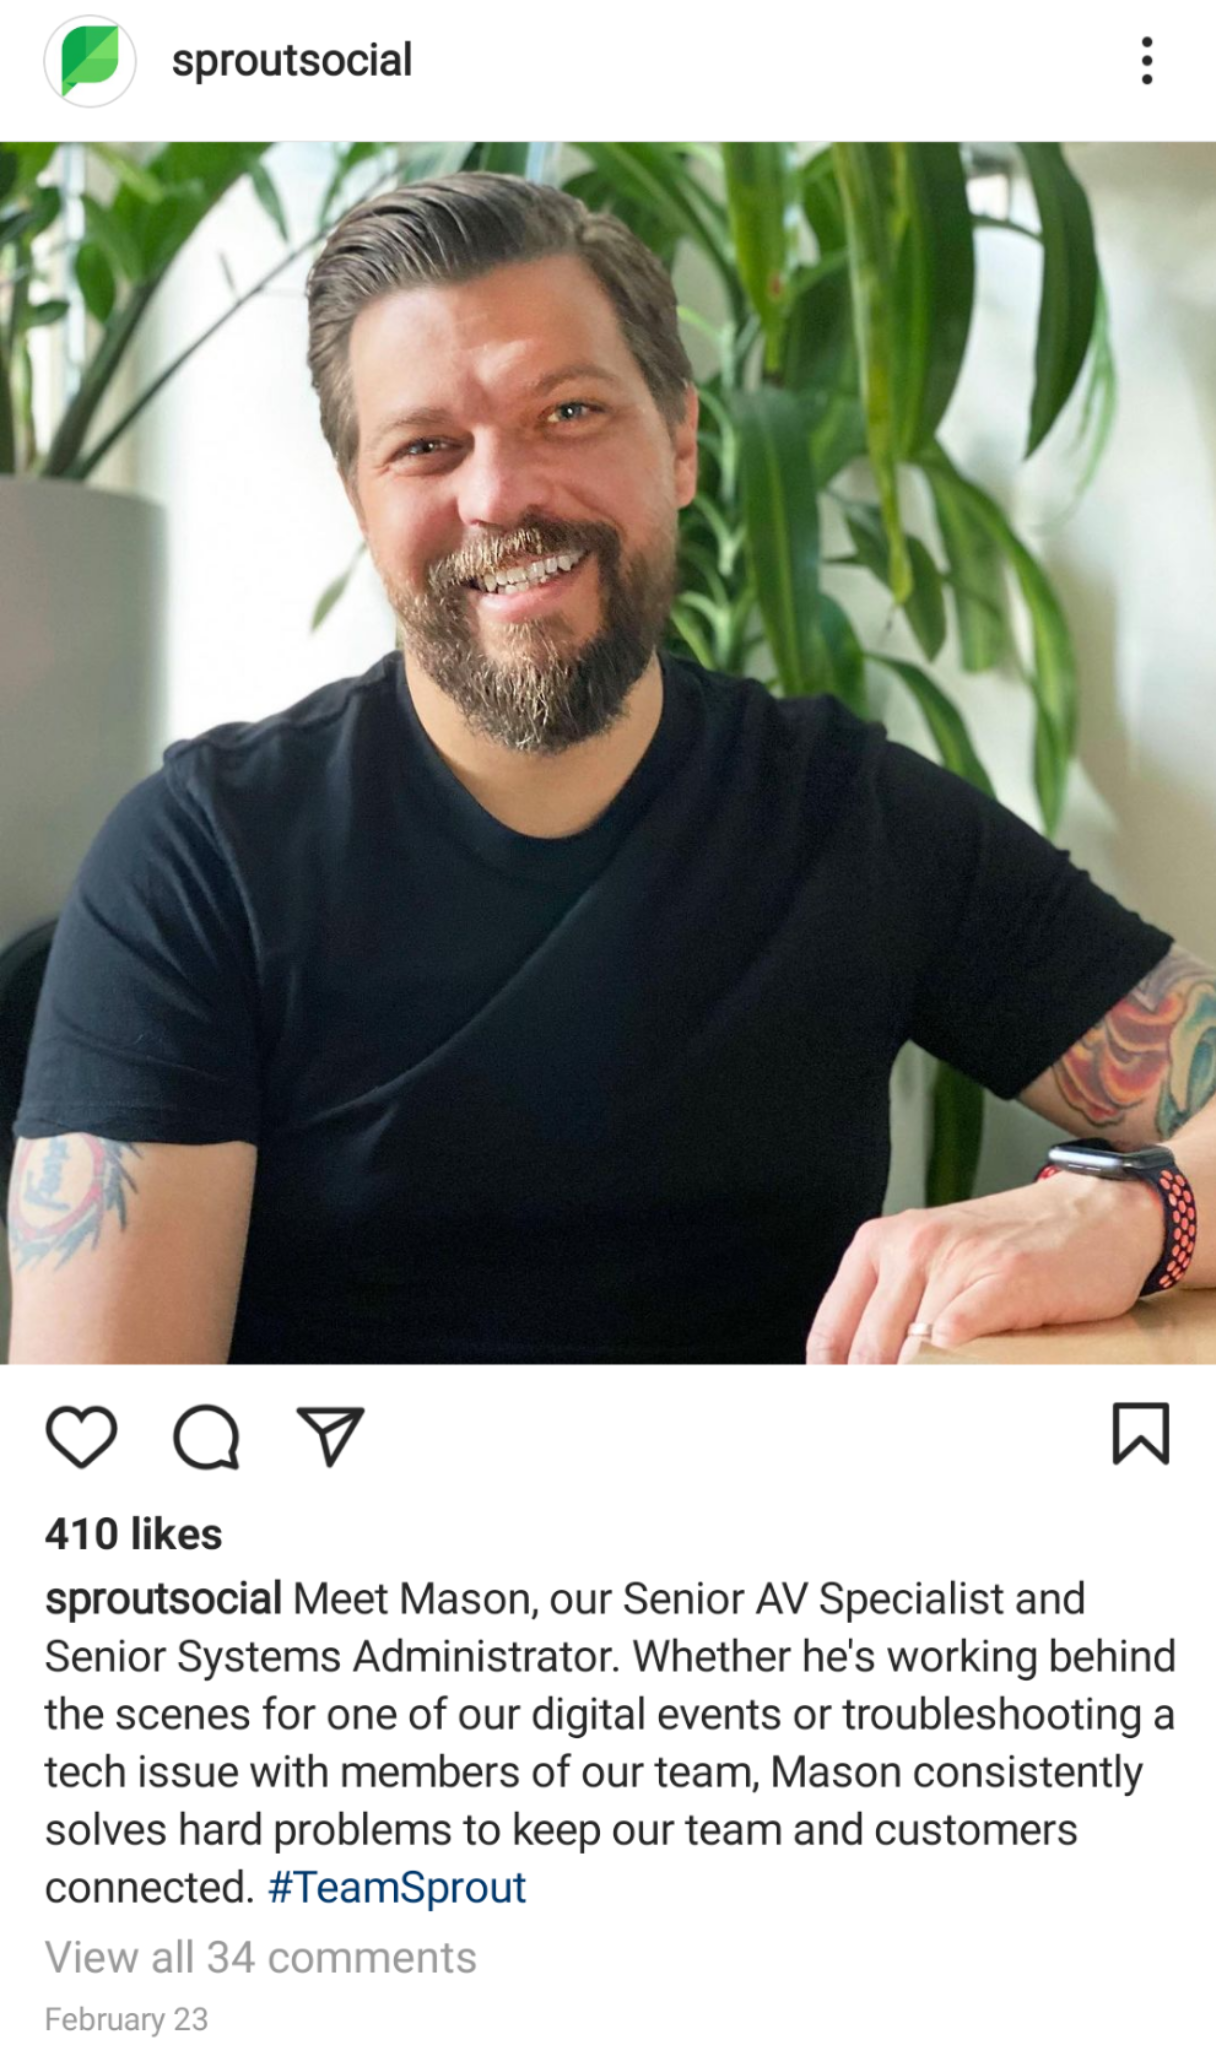 Sprout Social employee shout-out on Instagram